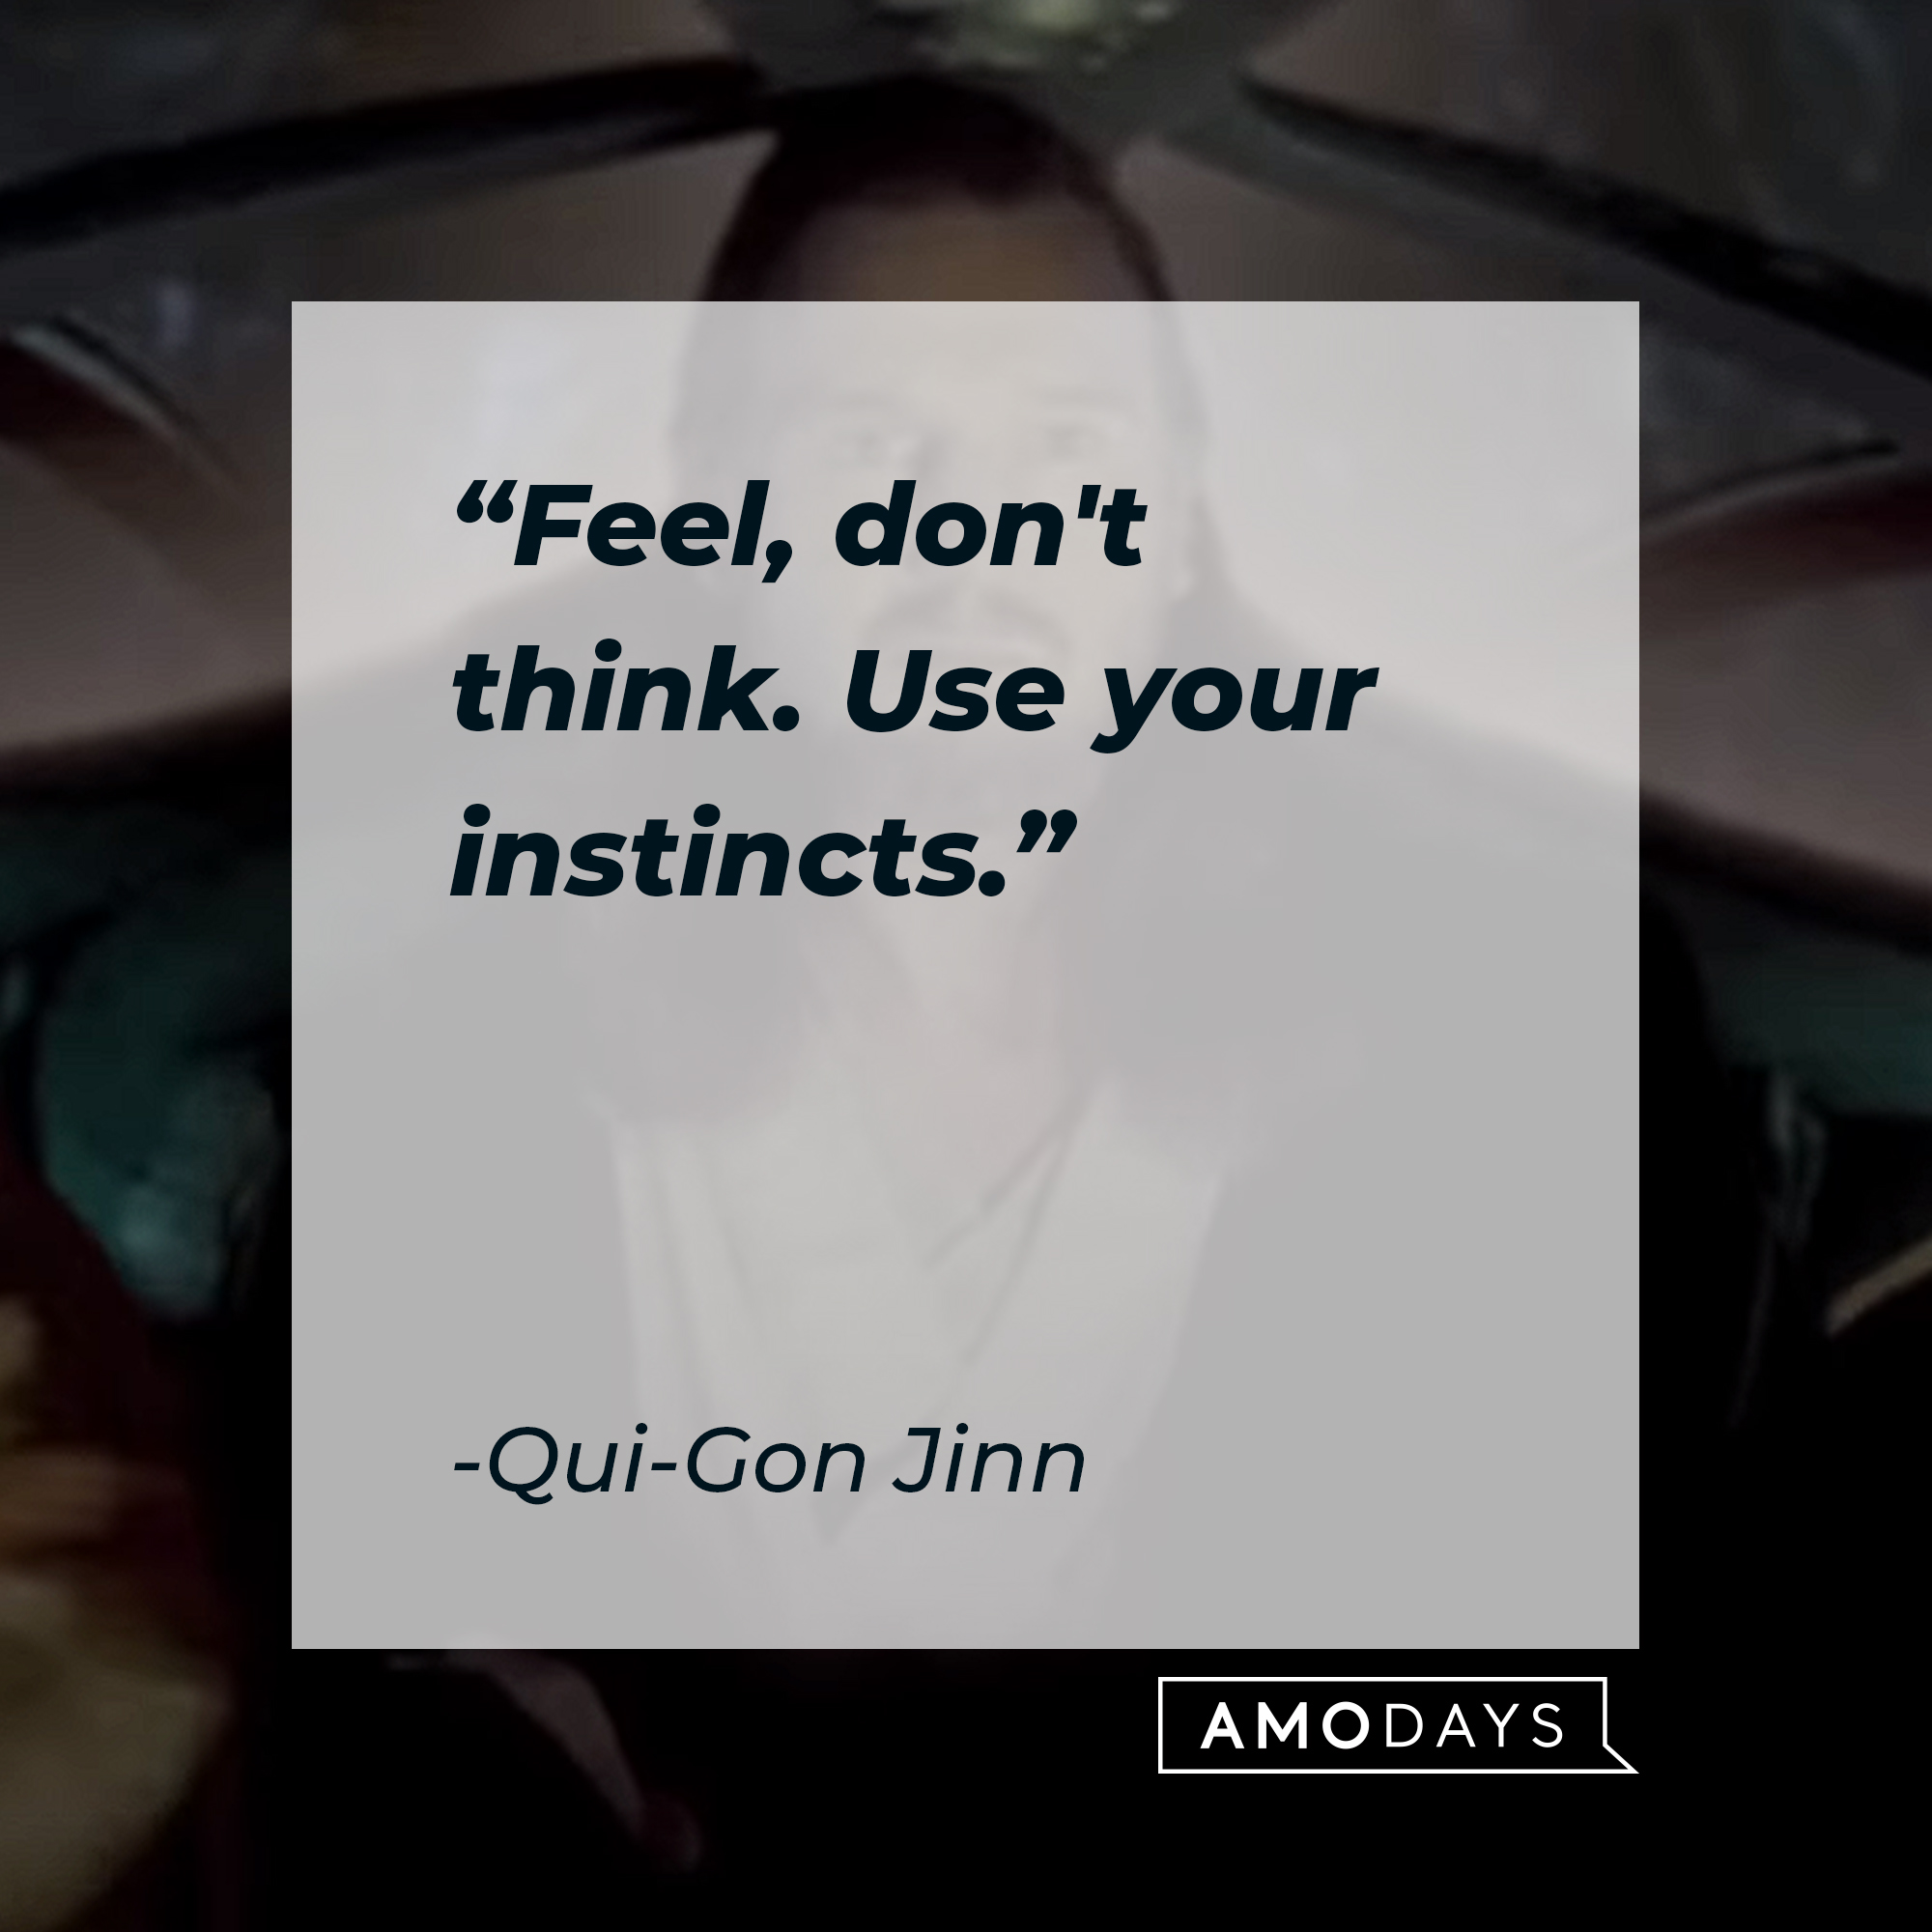 Qui-Gon Jinn with his quote: "Feel, don't think. Use your instincts." | Source: Youtube/StarWars